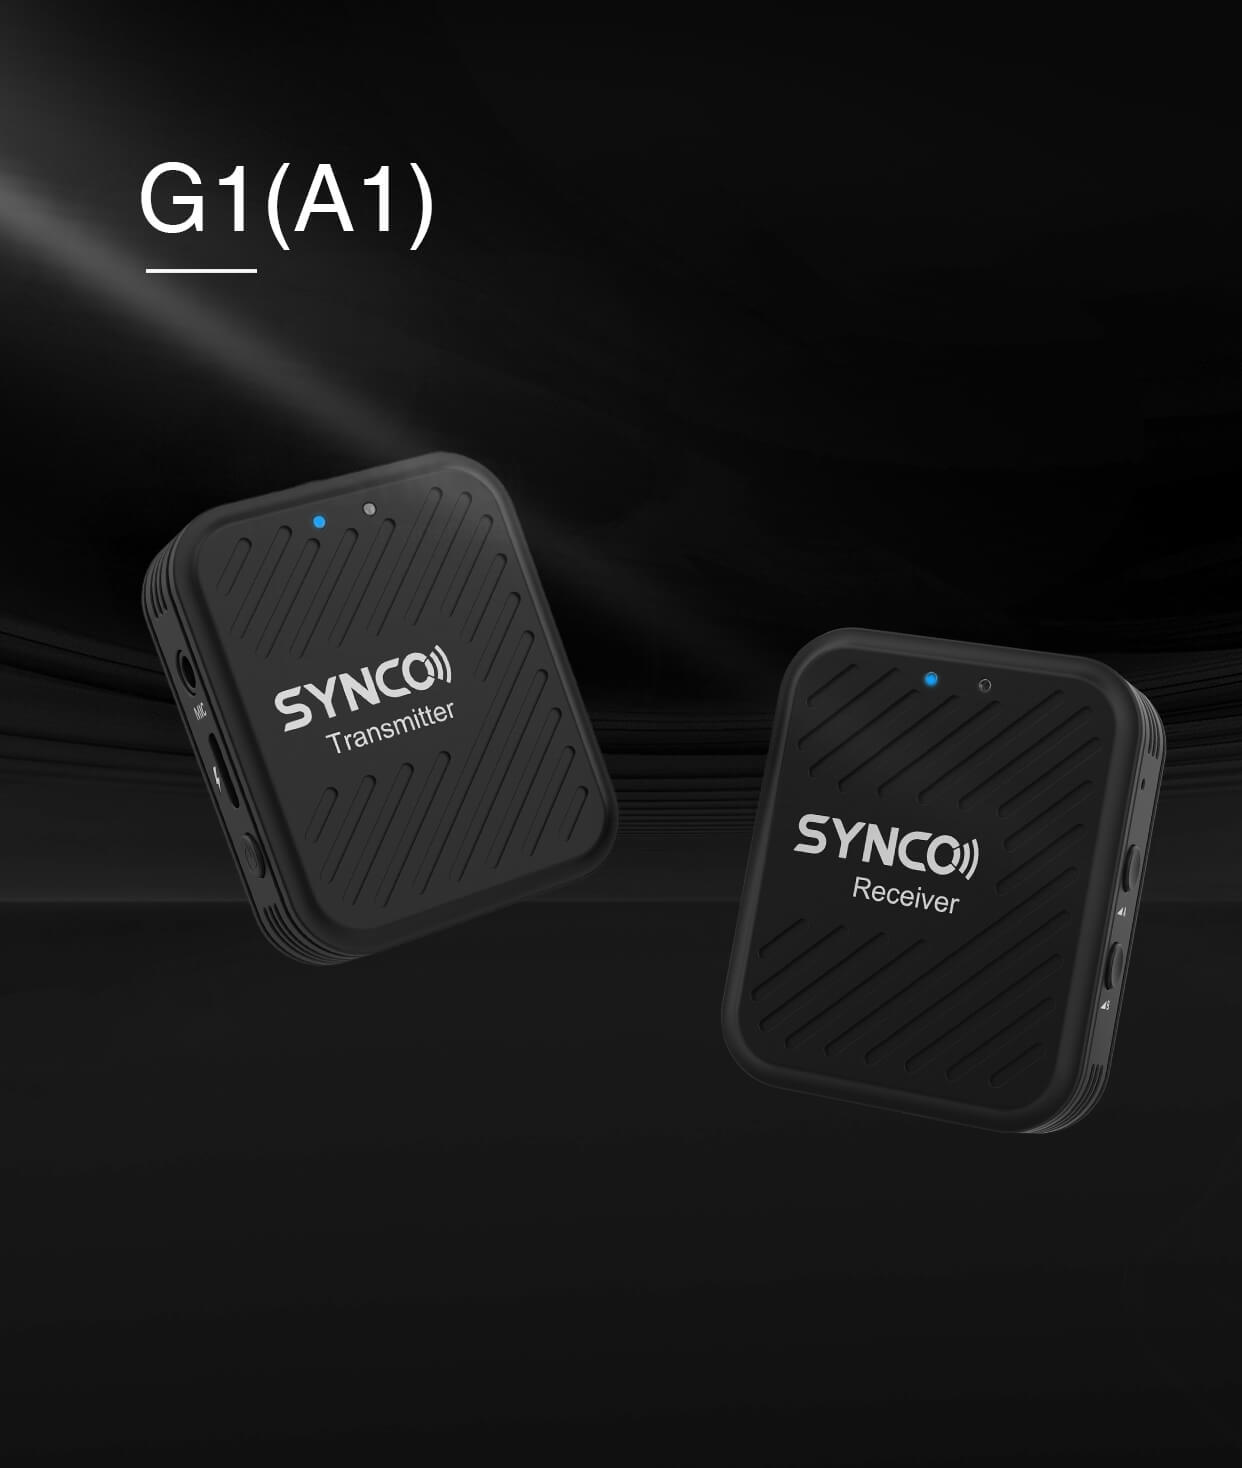 1-Trigger-1 2.4GHz Wireless Clip On Microphone SYNCO G1(A1) | SYNCO